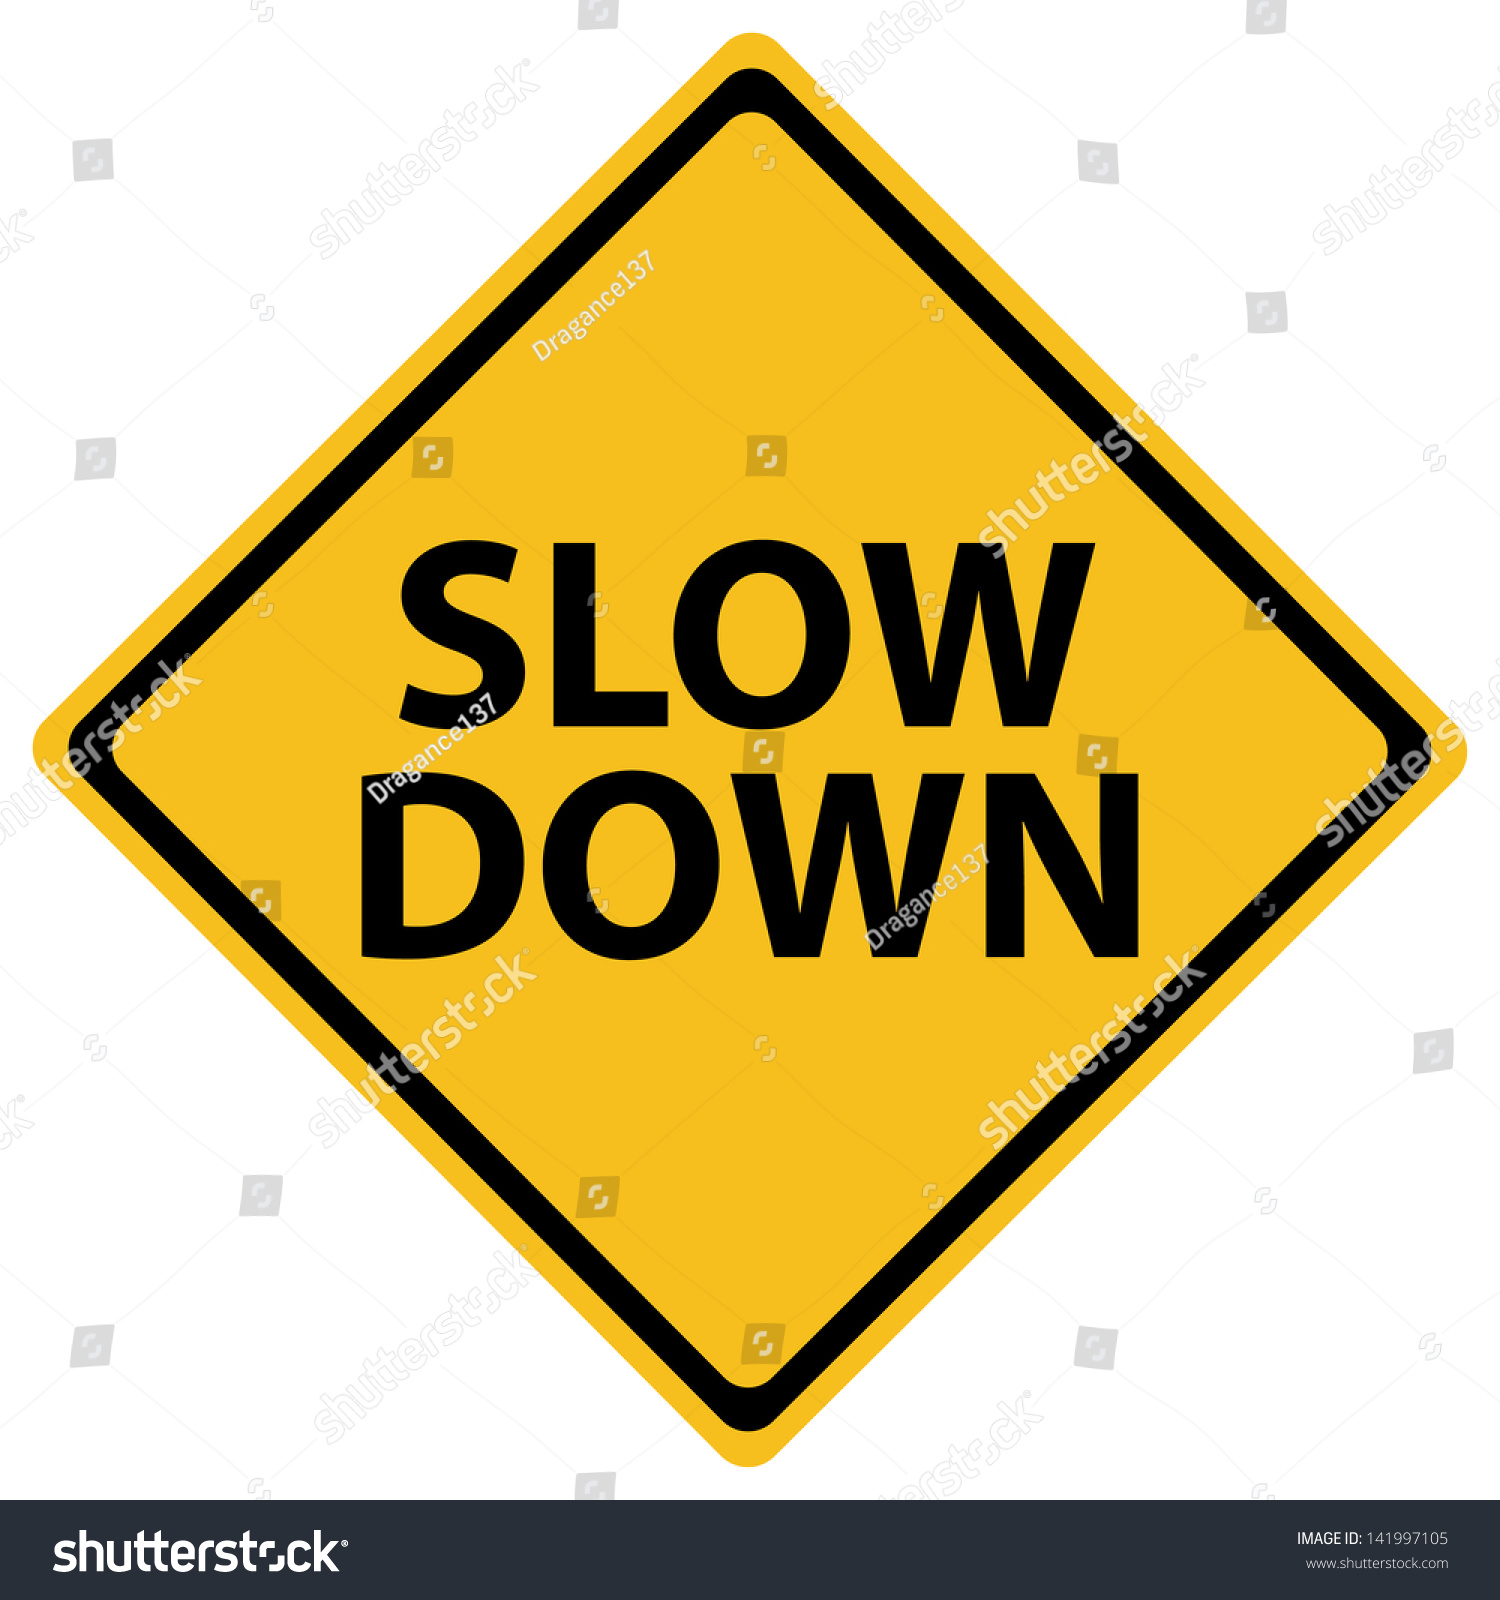 Slow more. Знак Slow клипарт вектор. Дорожный знак Slow down PNG. Yellow means Slow down. Slow down Clipart.